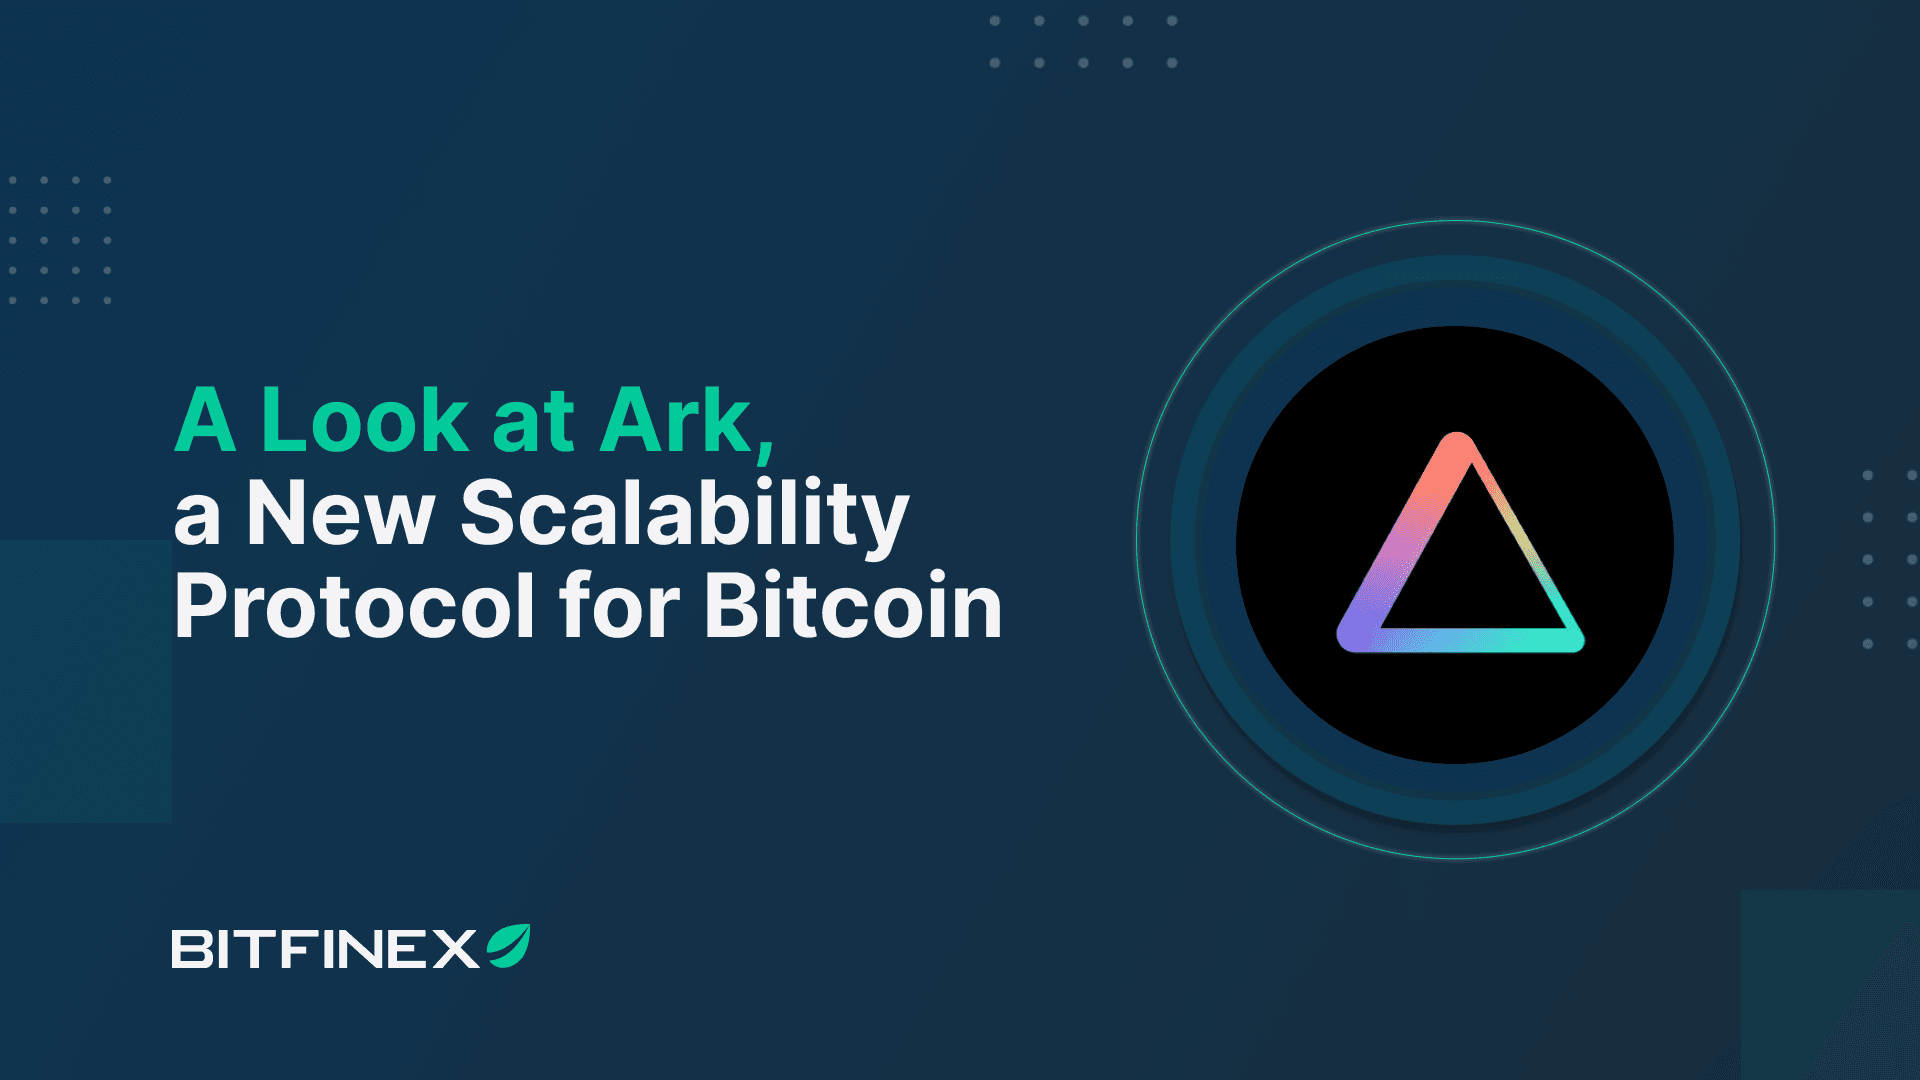 A Look at Ark, a New Scalability Protocol for Bitcoin